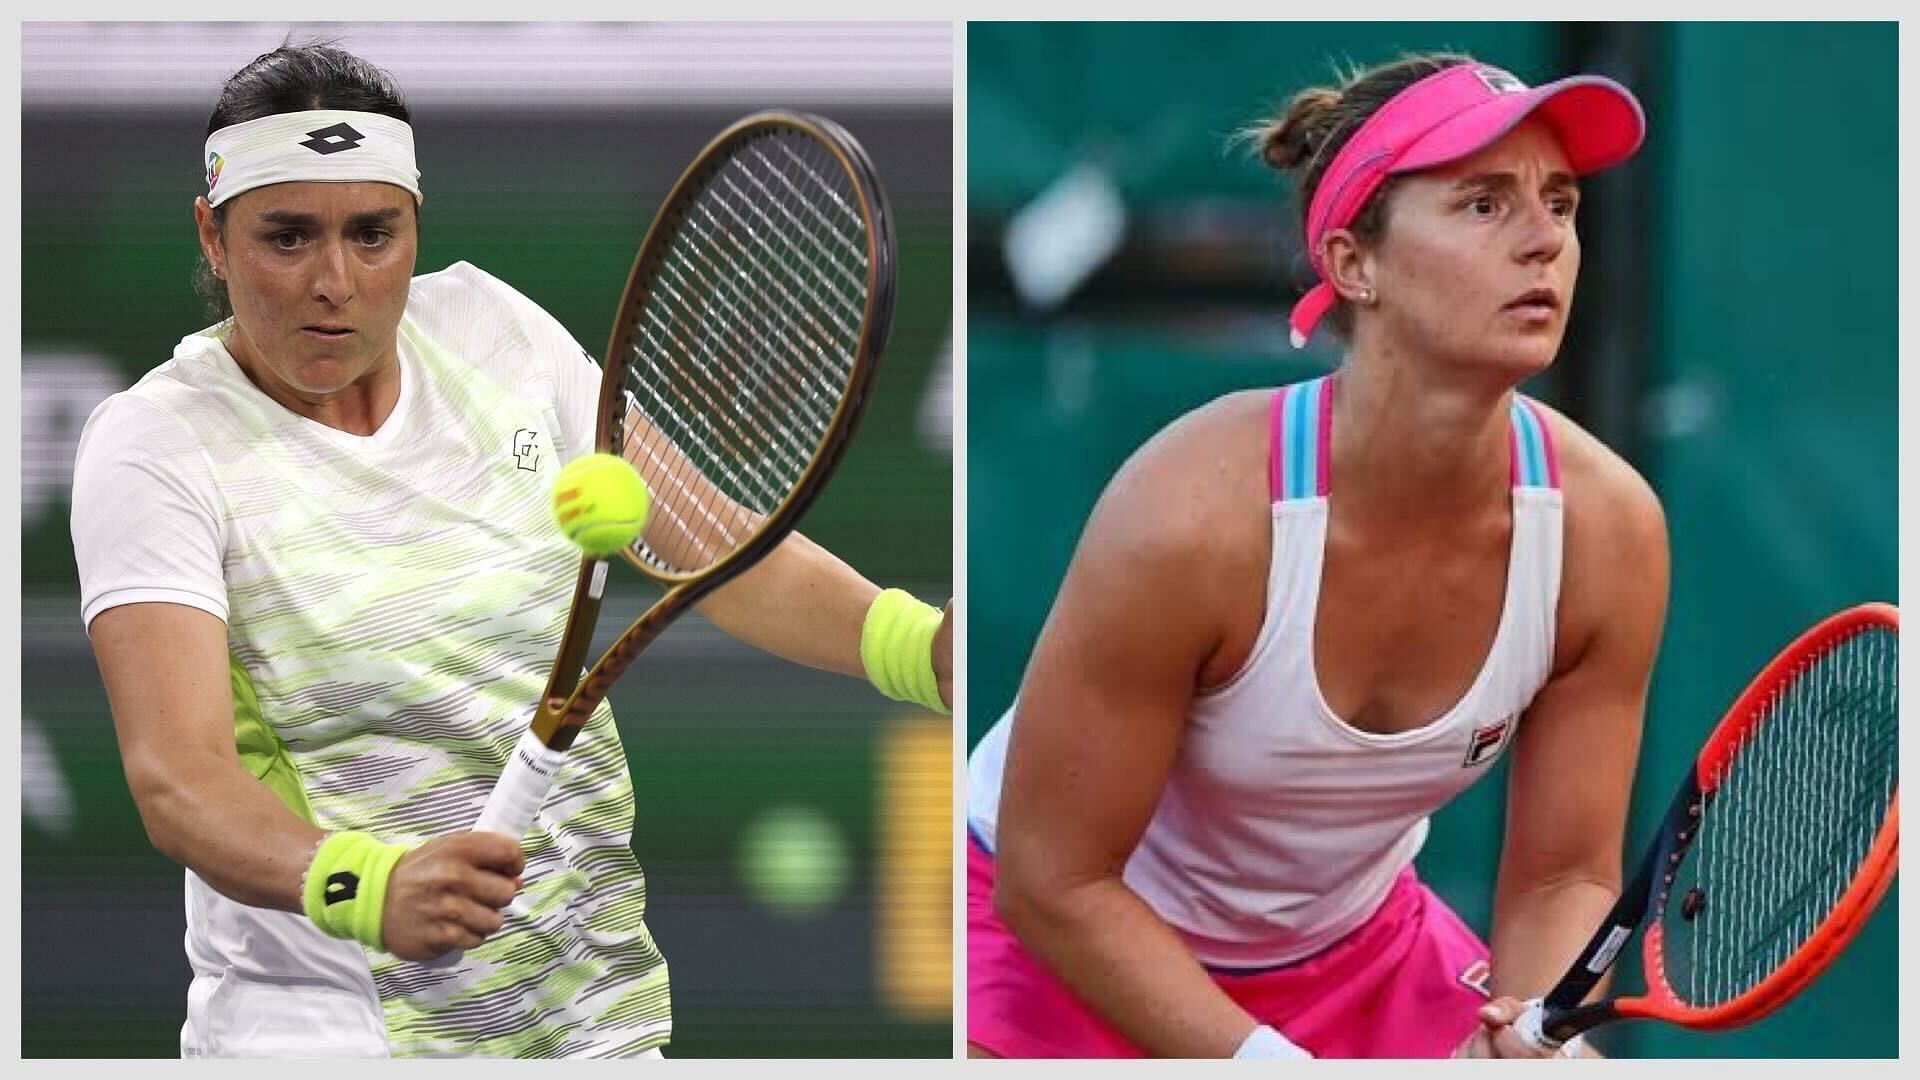 Ningbo Open: Ons Jabeur vs Nadia Podoroska preview, head-to-head, prediction, odds and pick